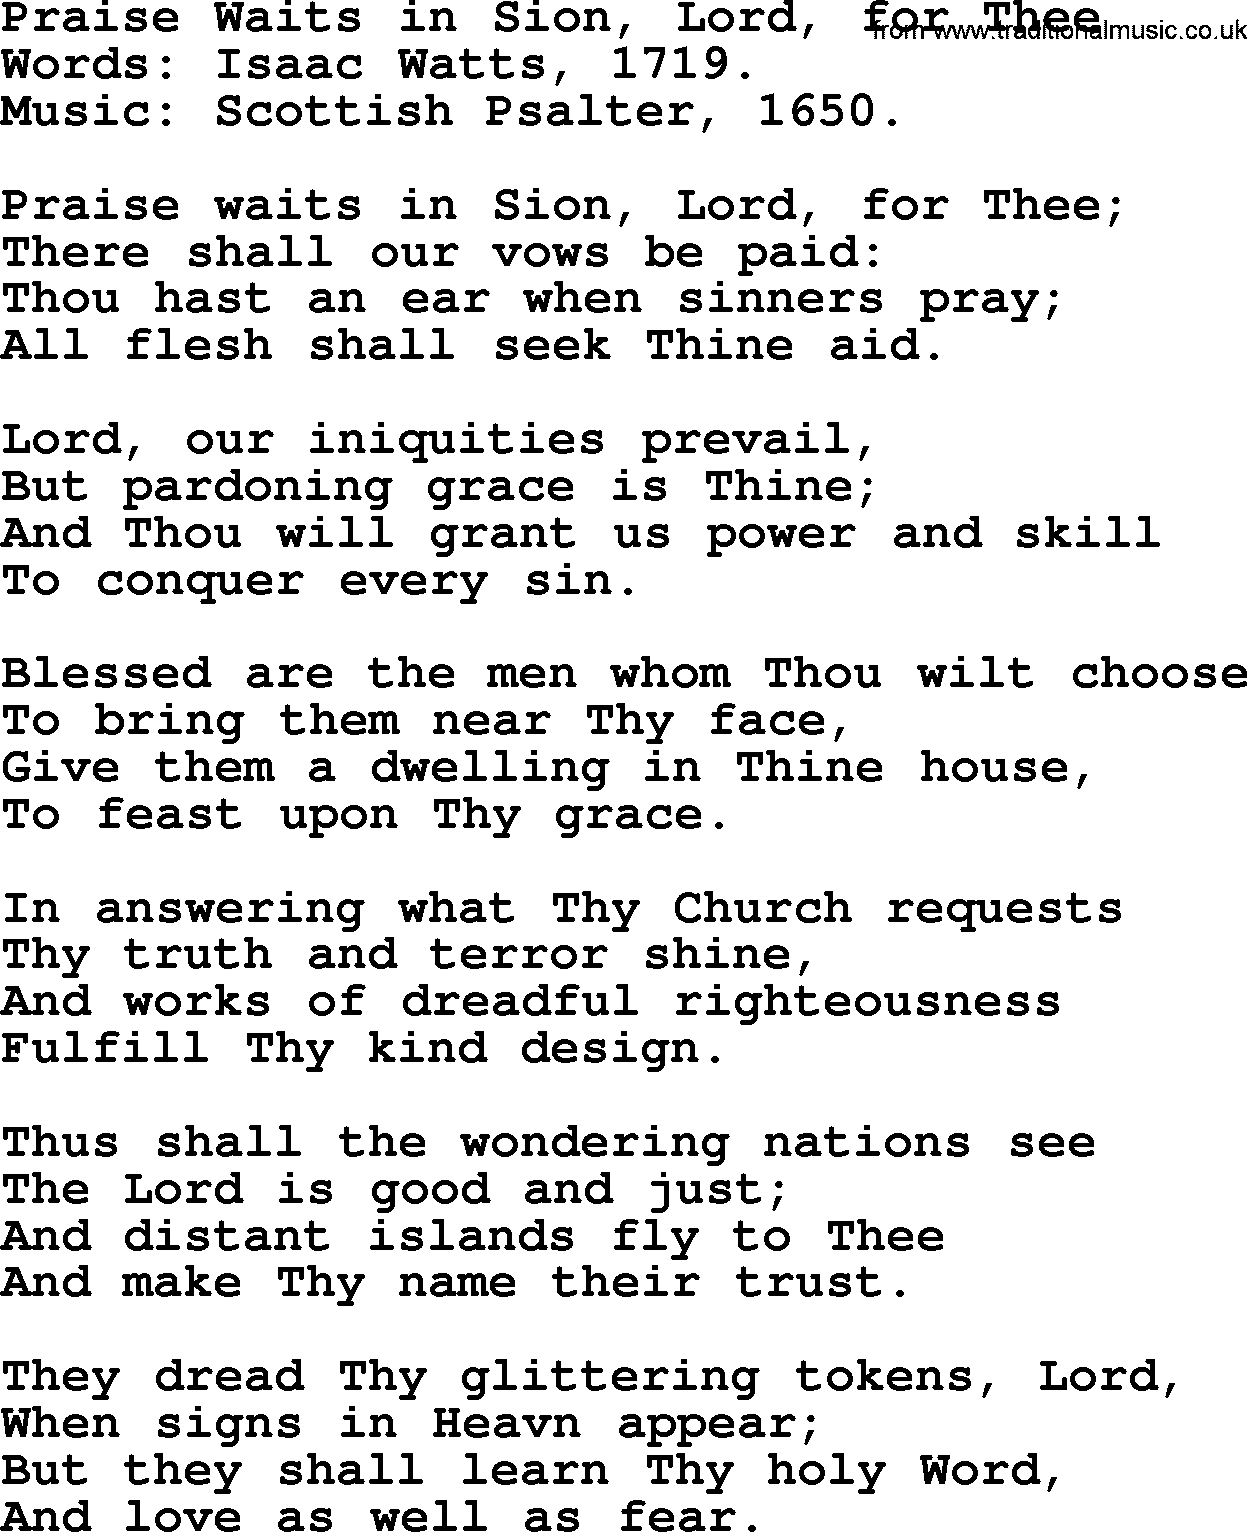 Isaac Watts Christian hymn: Praise Waits in Sion, Lord, for Thee- lyricss